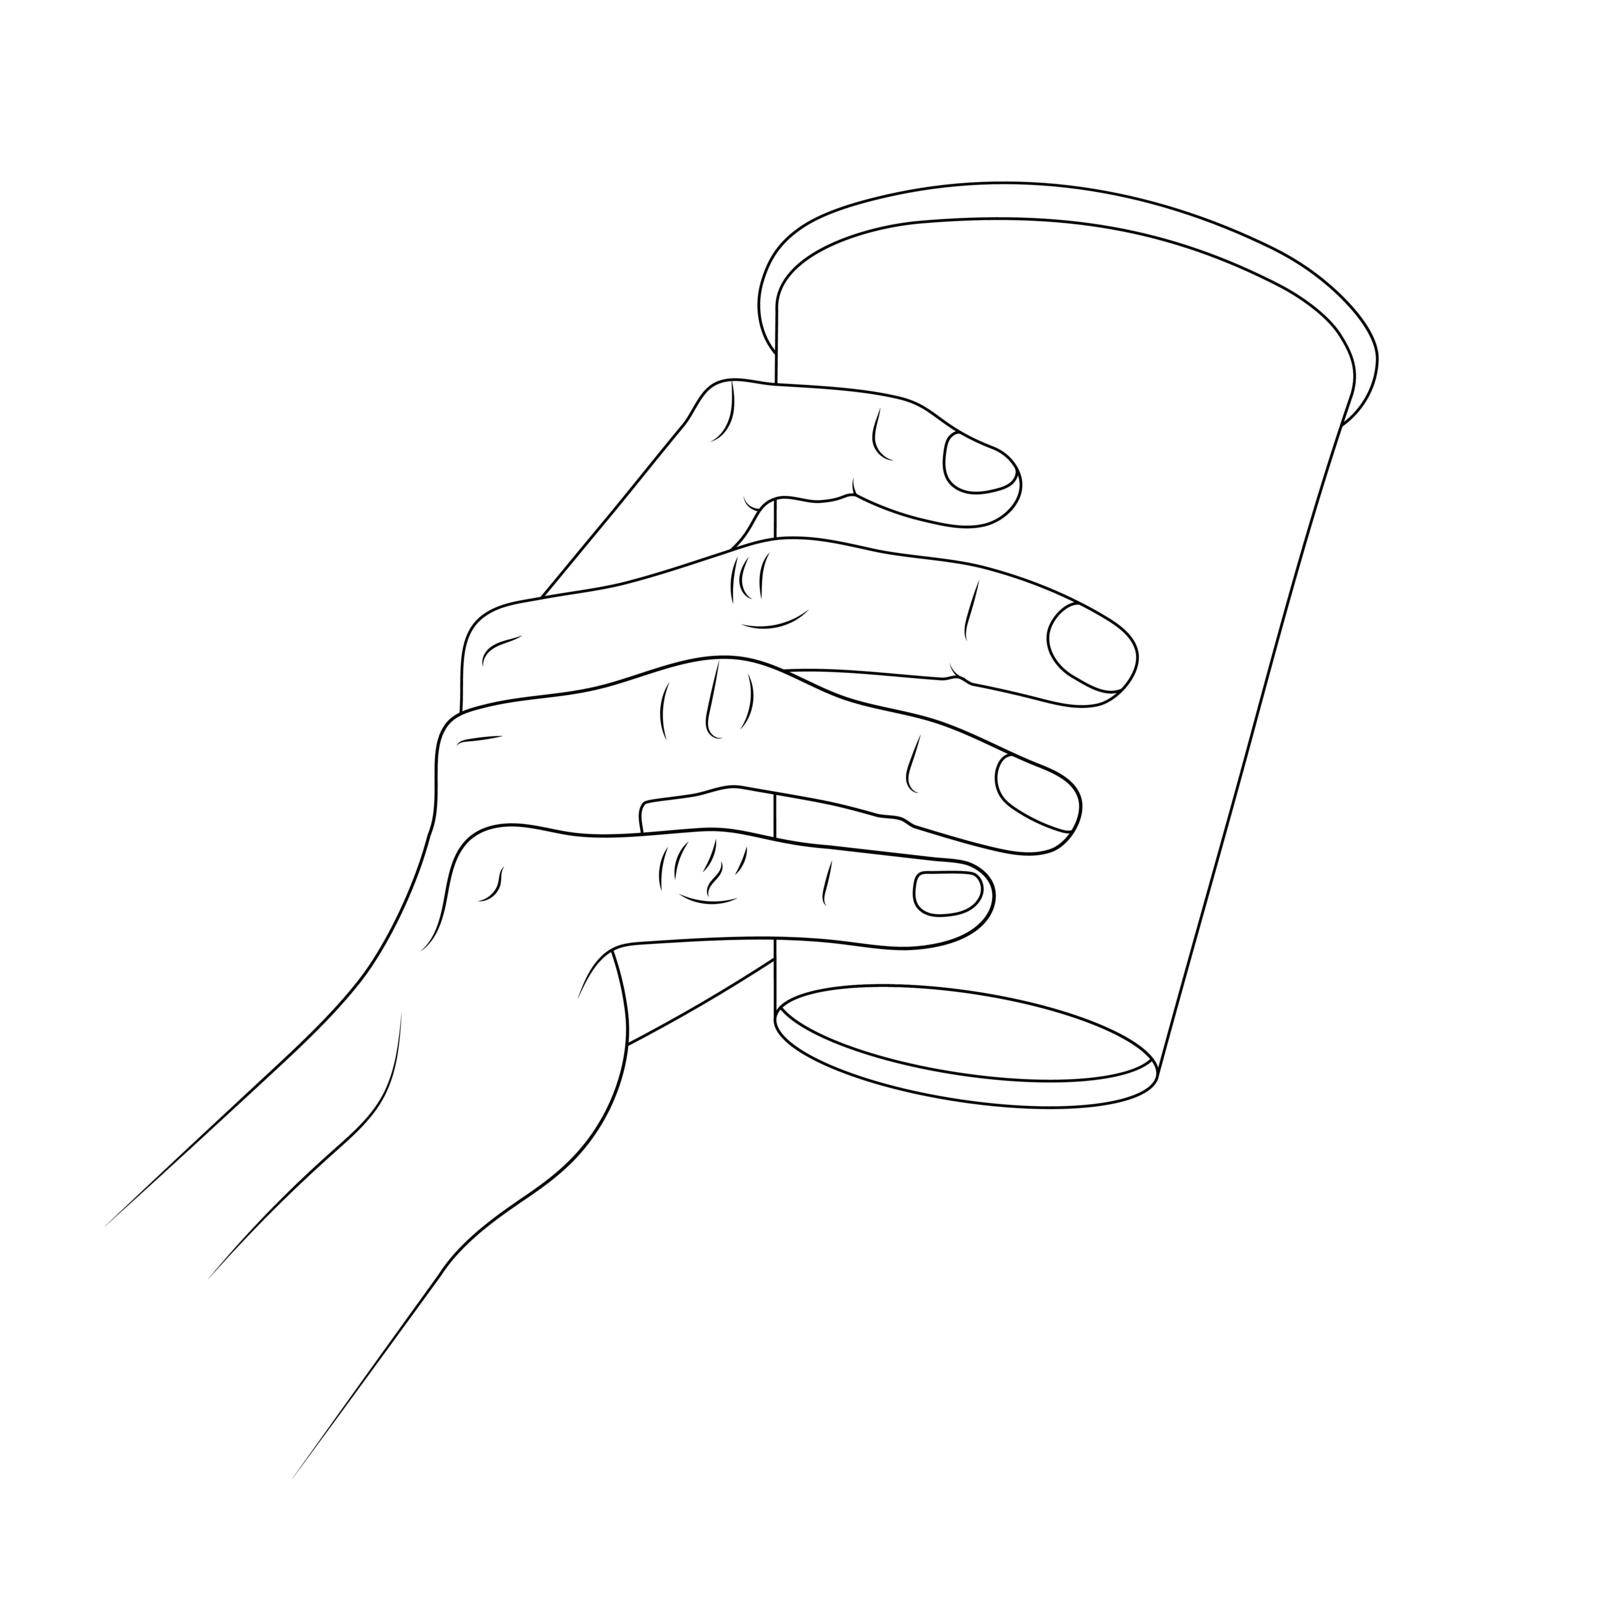 Disposable paper coffee cup in hand. Vector sketch illustration.